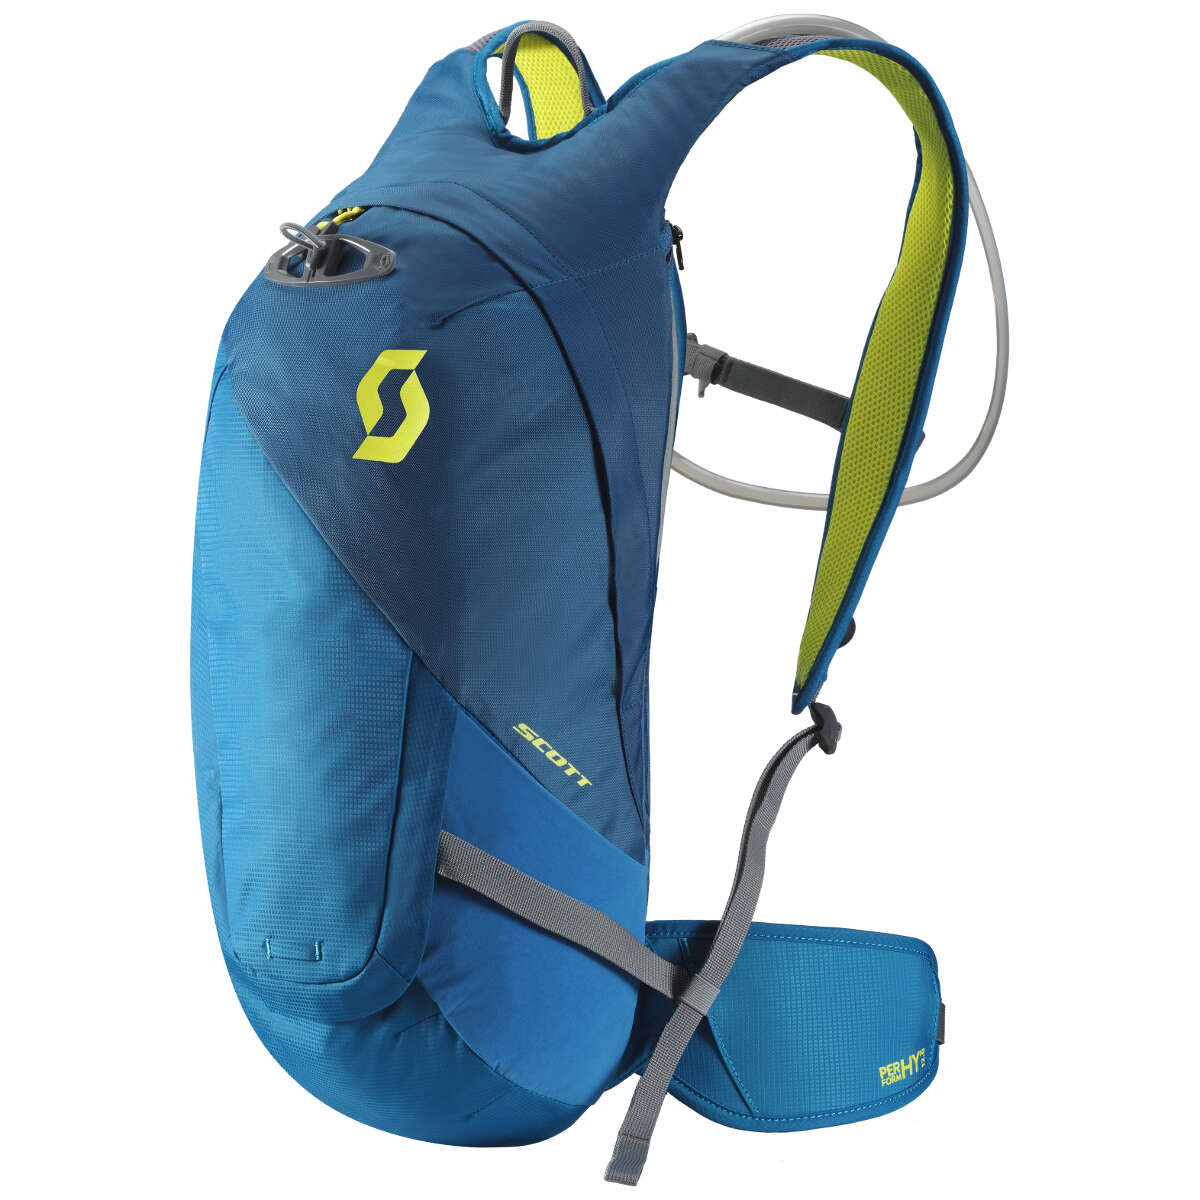 Scott Backpack with Hydration System Compartment, 12 Liter Perform HY 12 Seaport Blue/Sulphur Yellow